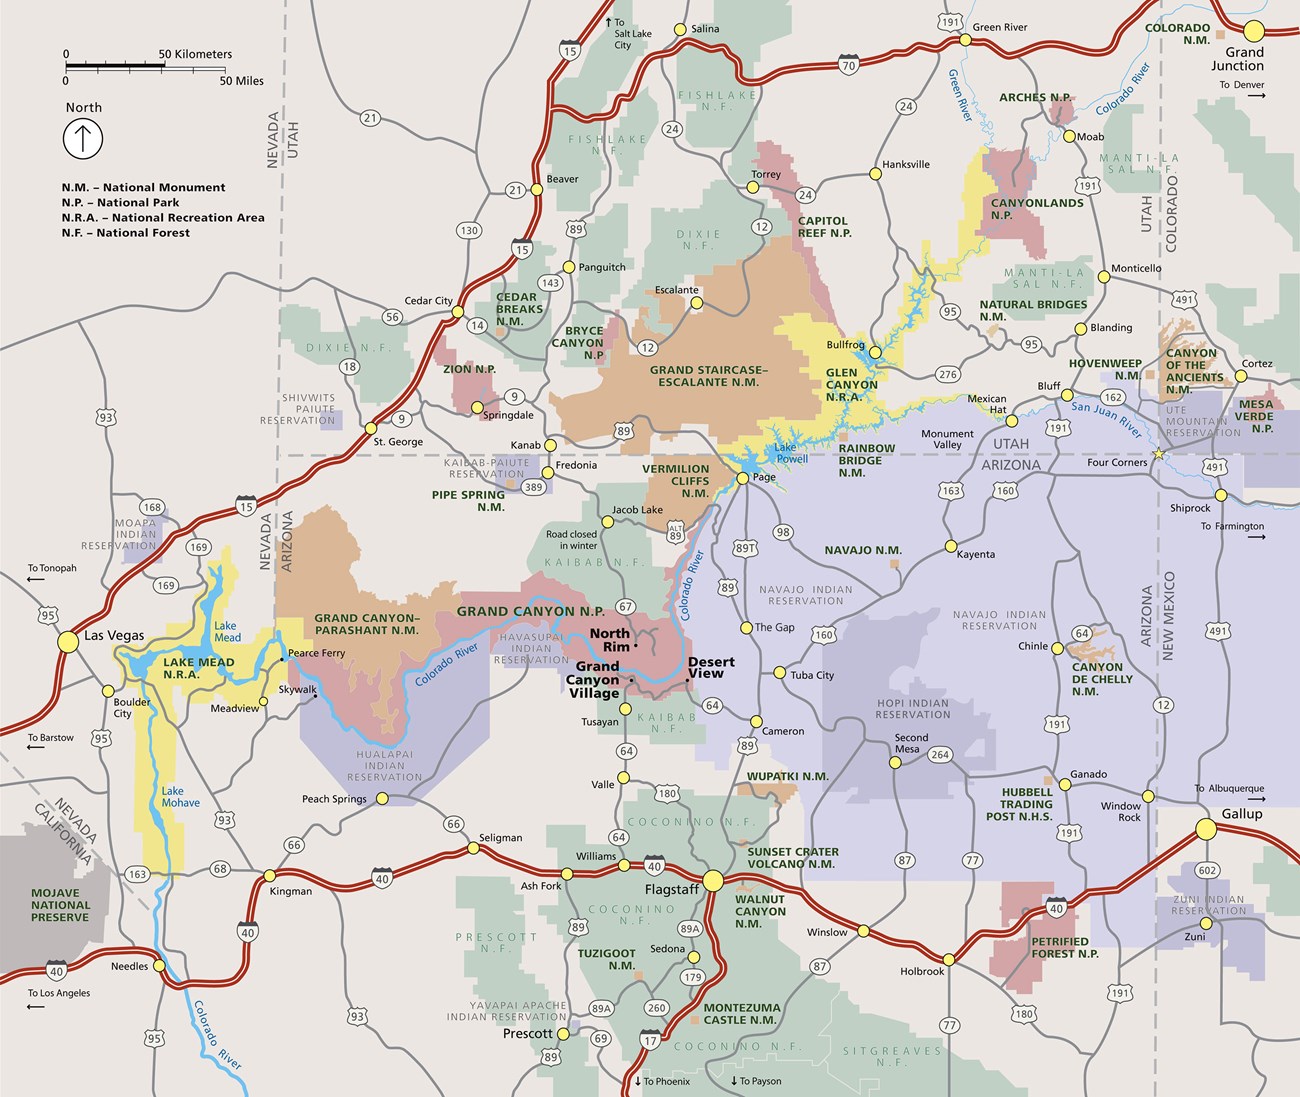 Grand Canyon Area Map: Shows major highways, cities, towns and tribal and public lands.